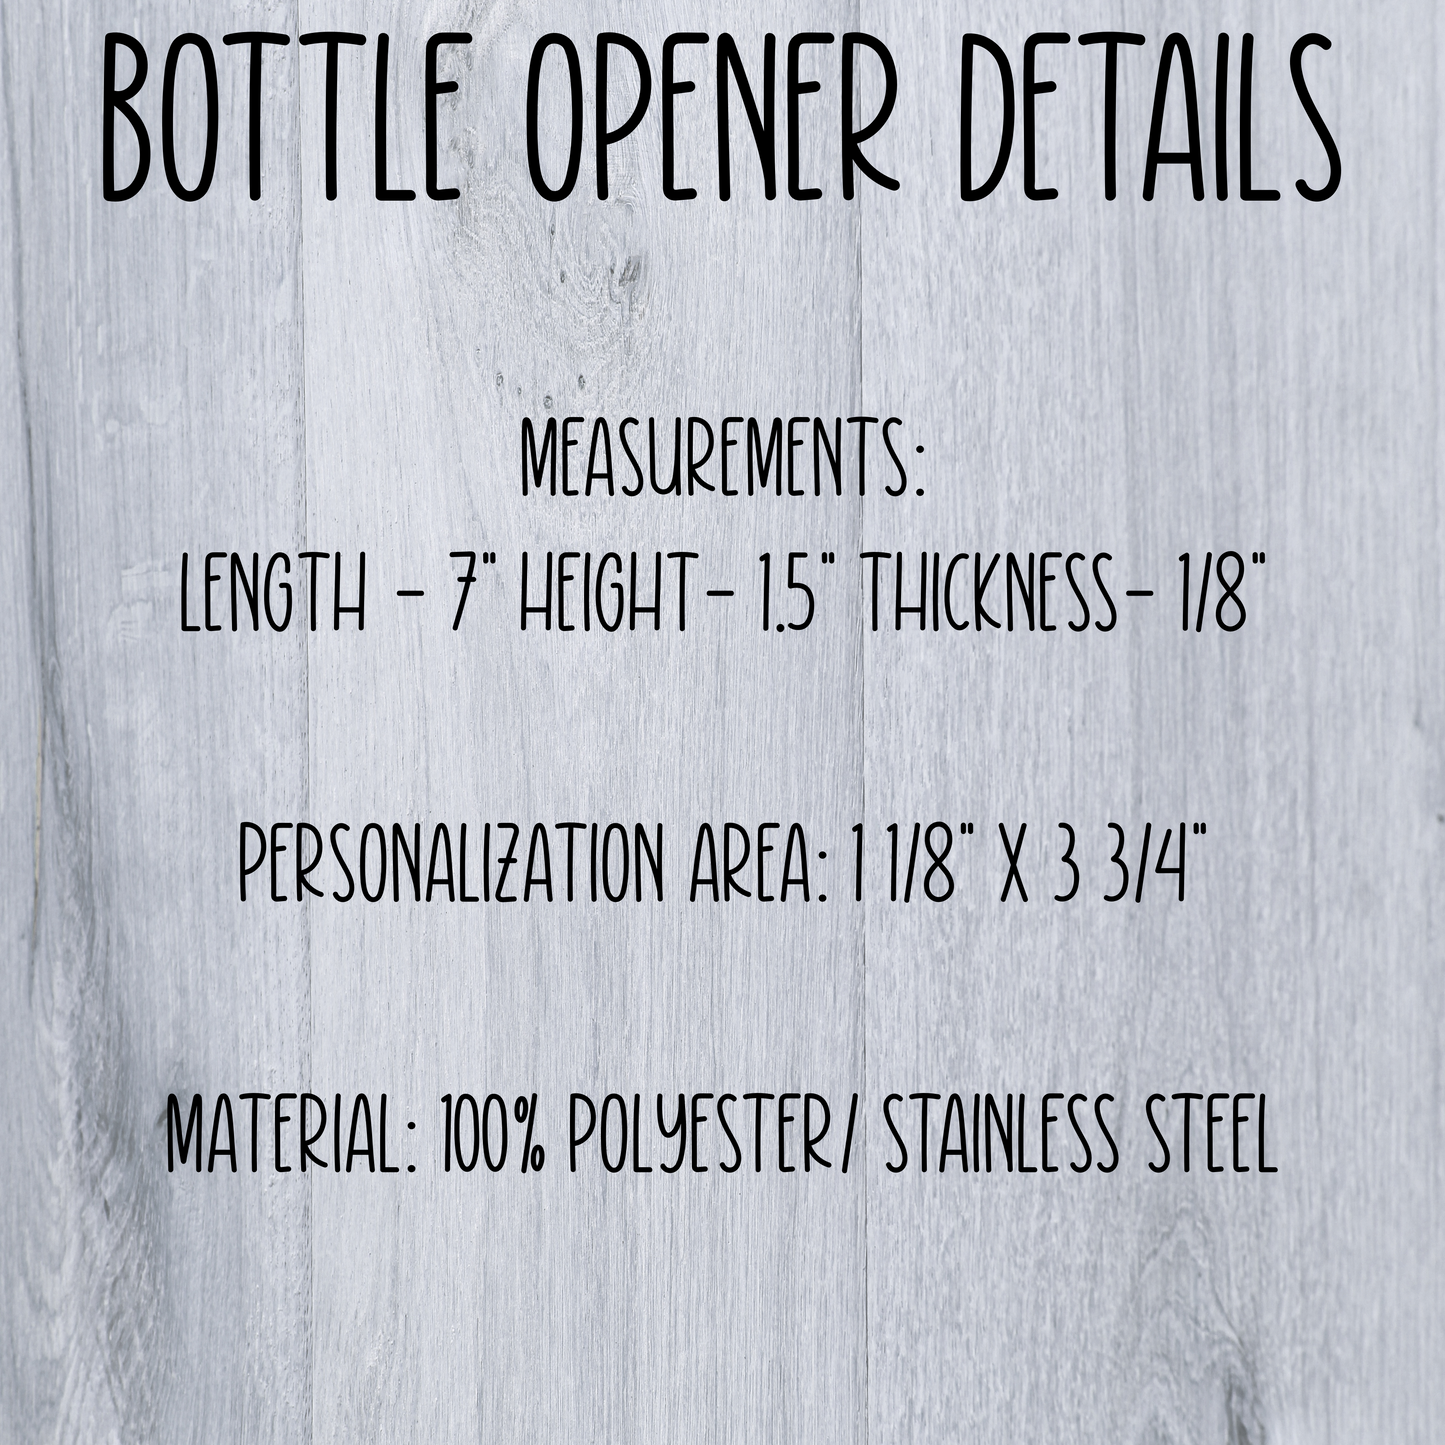 Take Your Top Off - 1 1/2" x 7" Stainless Steel Bottle Opener